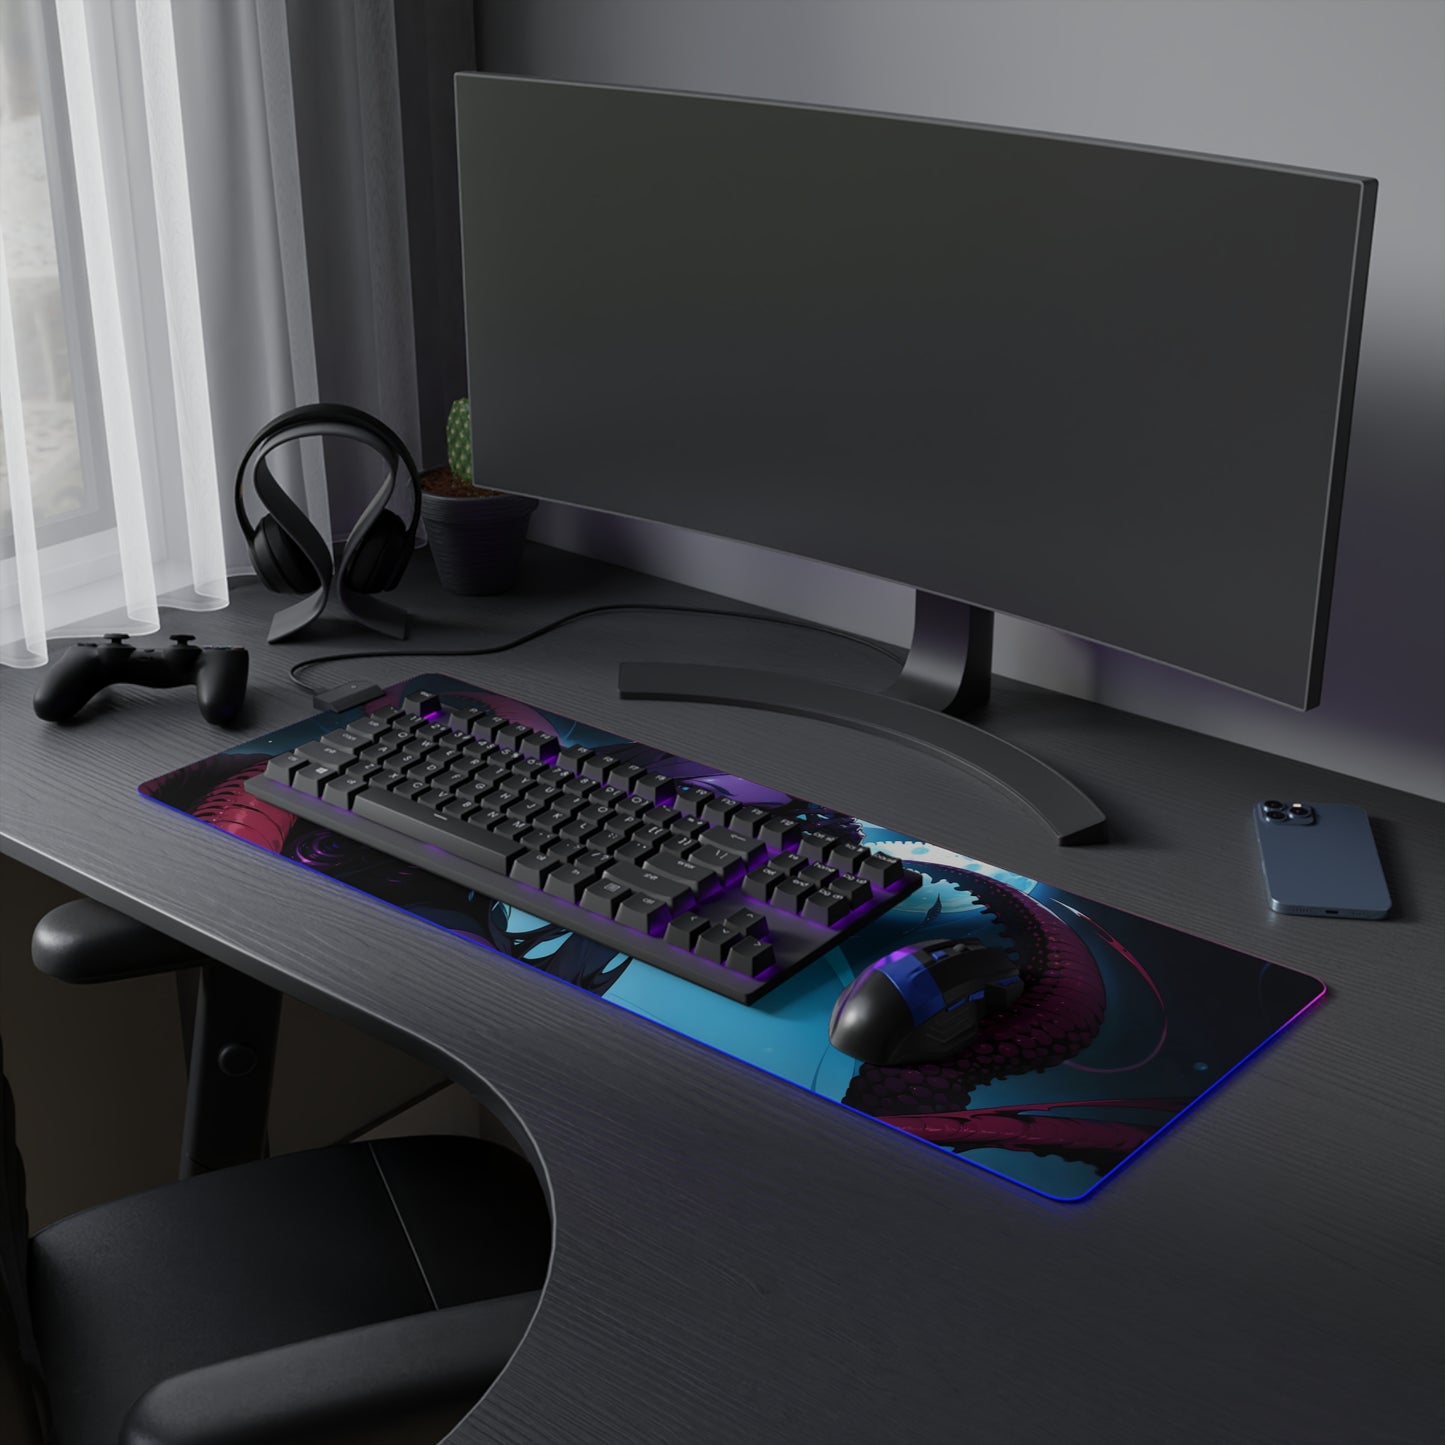 LCAM-2 LED Gaming Mouse Pad